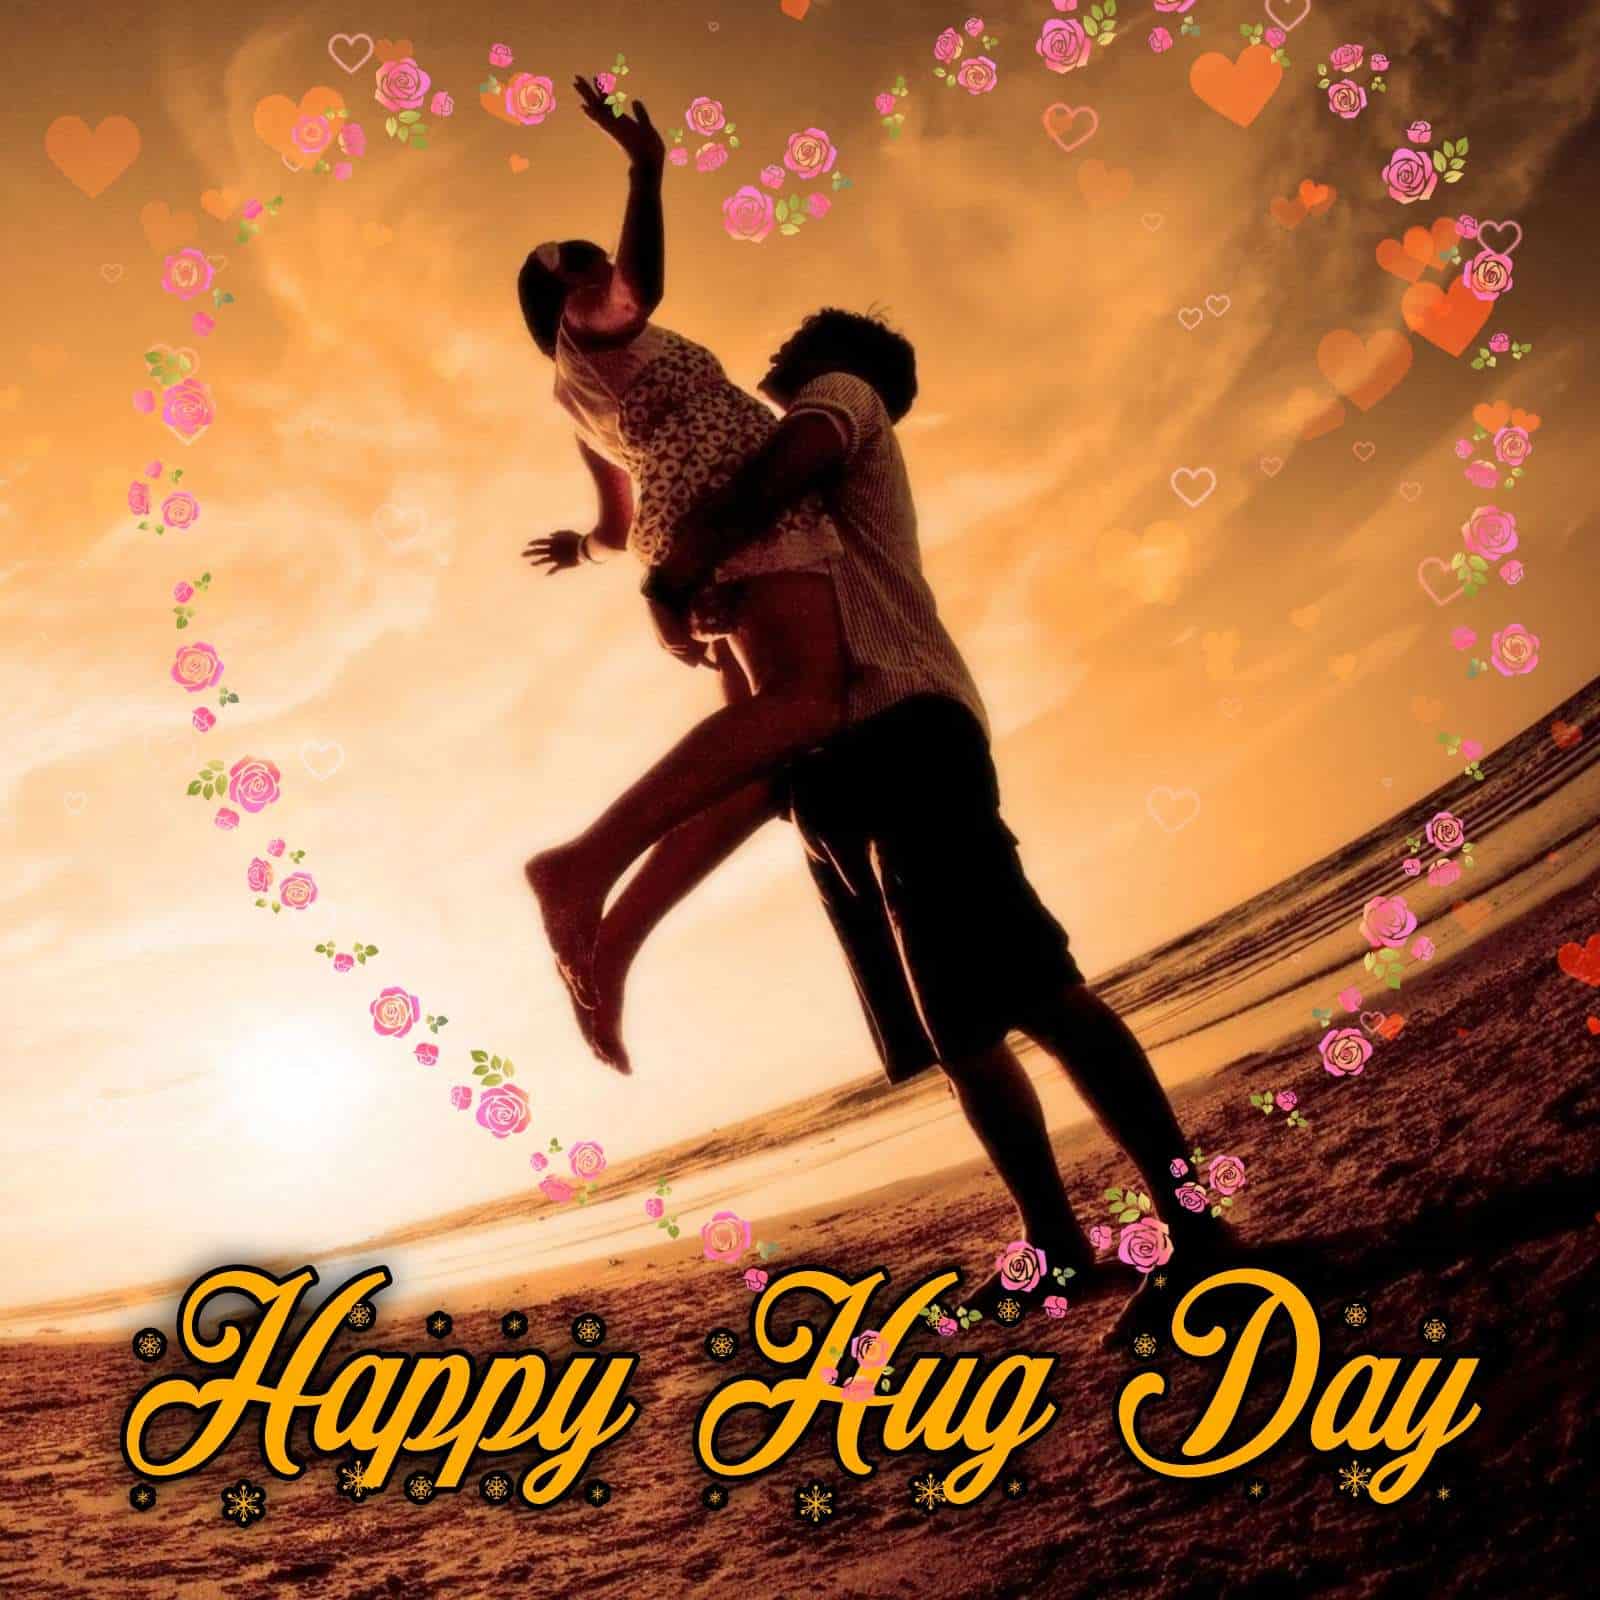 Hug Day Images for Friends